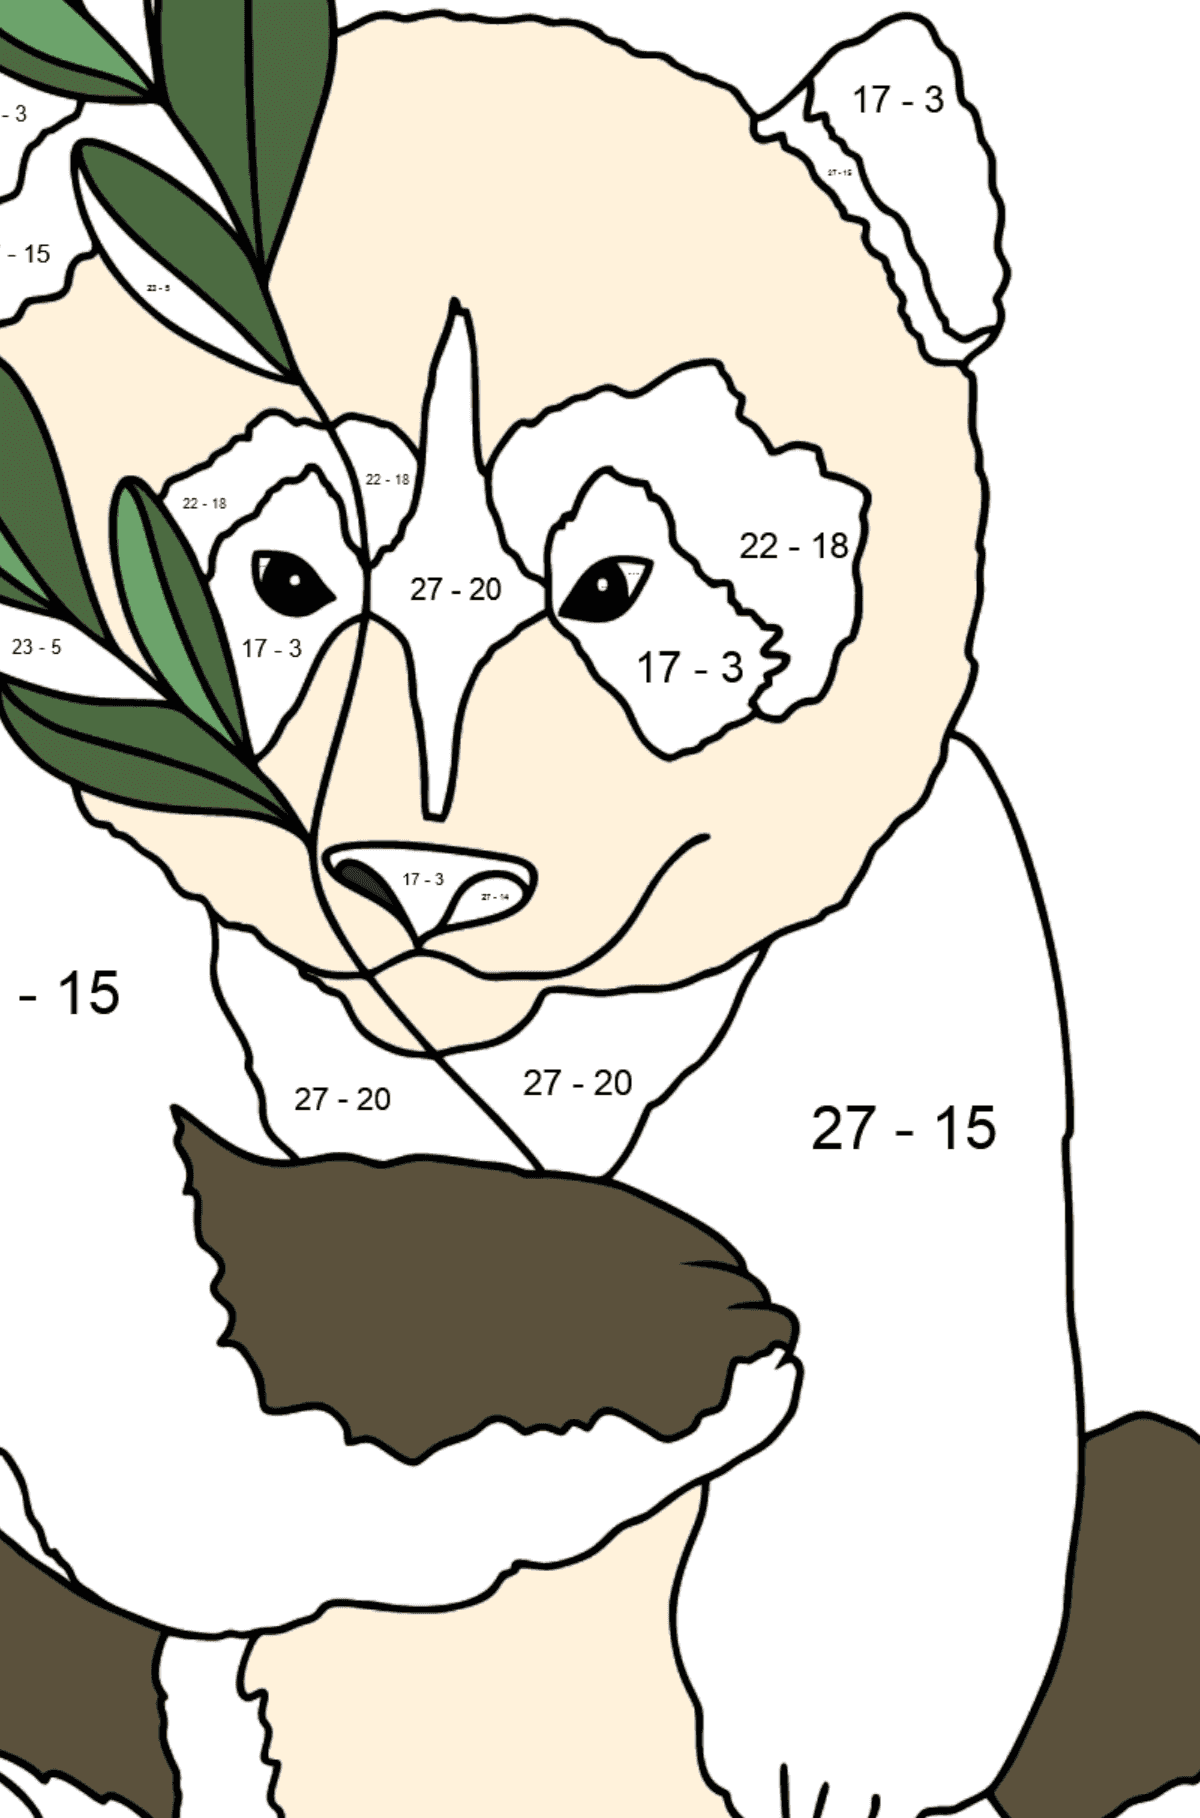 Coloring Page - A Panda Loves Bamboo Leaves - Math Coloring - Subtraction for Kids